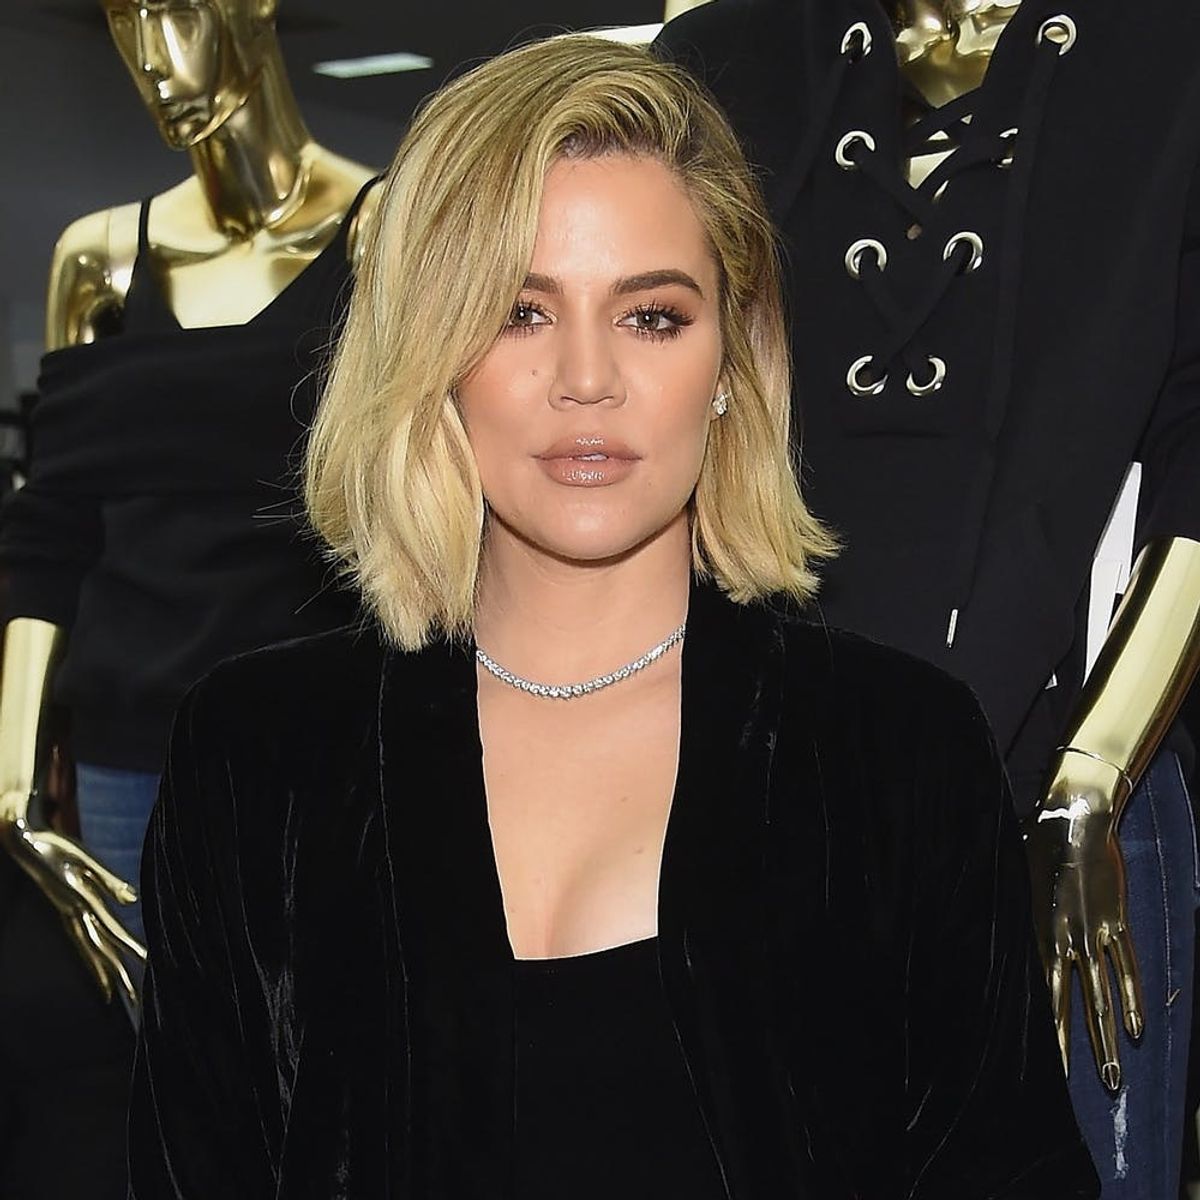 Fans Think Khloé Kardashian Just Dropped a Huge Hint About Her Rumored Pregnancy